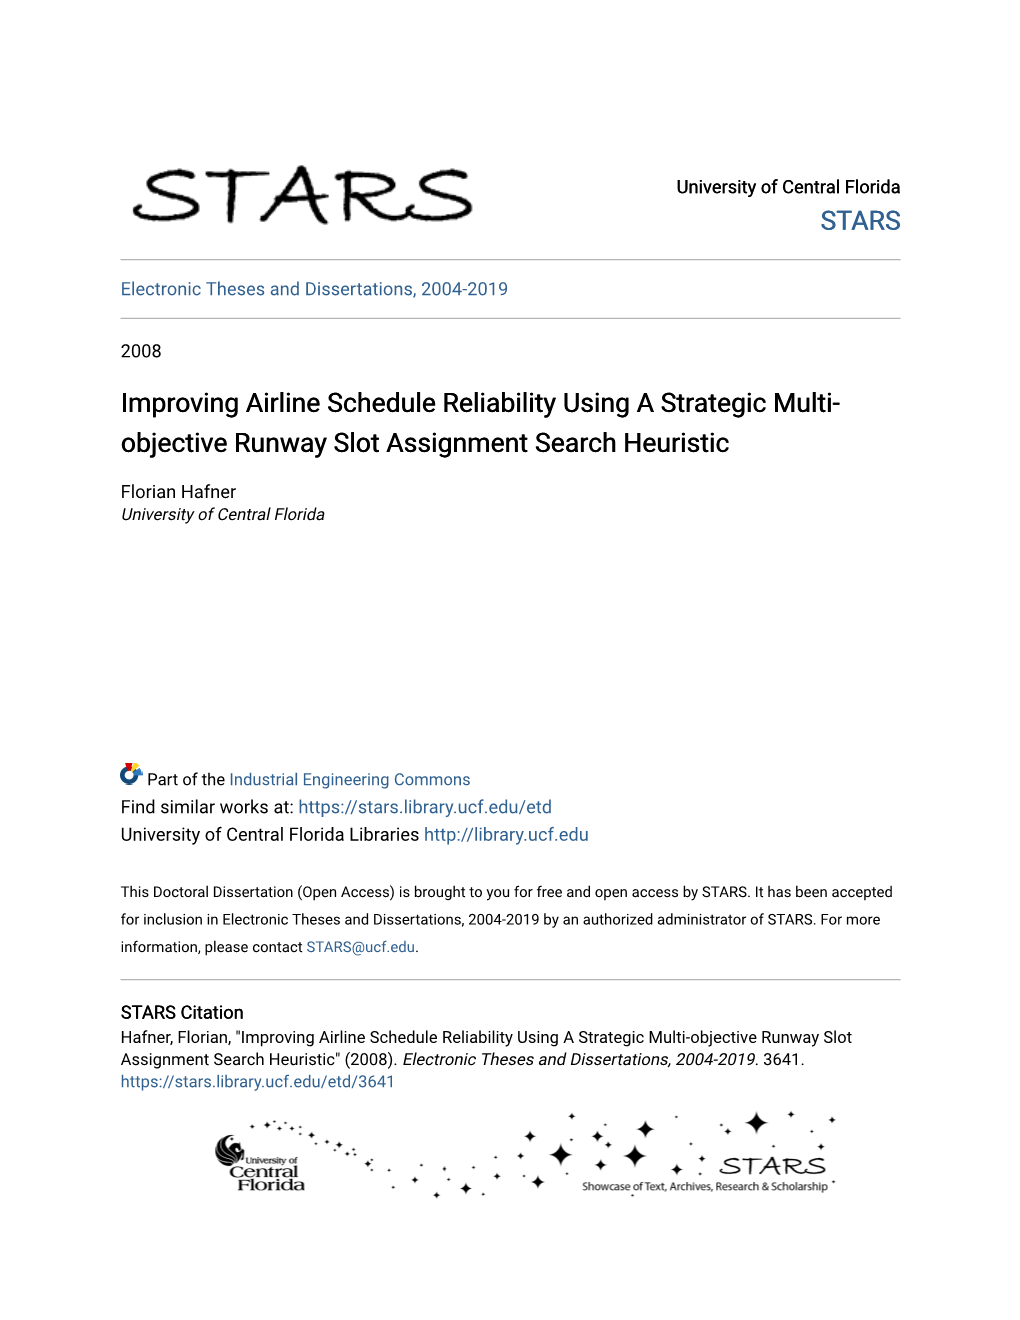 Improving Airline Schedule Reliability Using a Strategic Multi-Objective Runway Slot Assignment Search Heuristic" (2008)